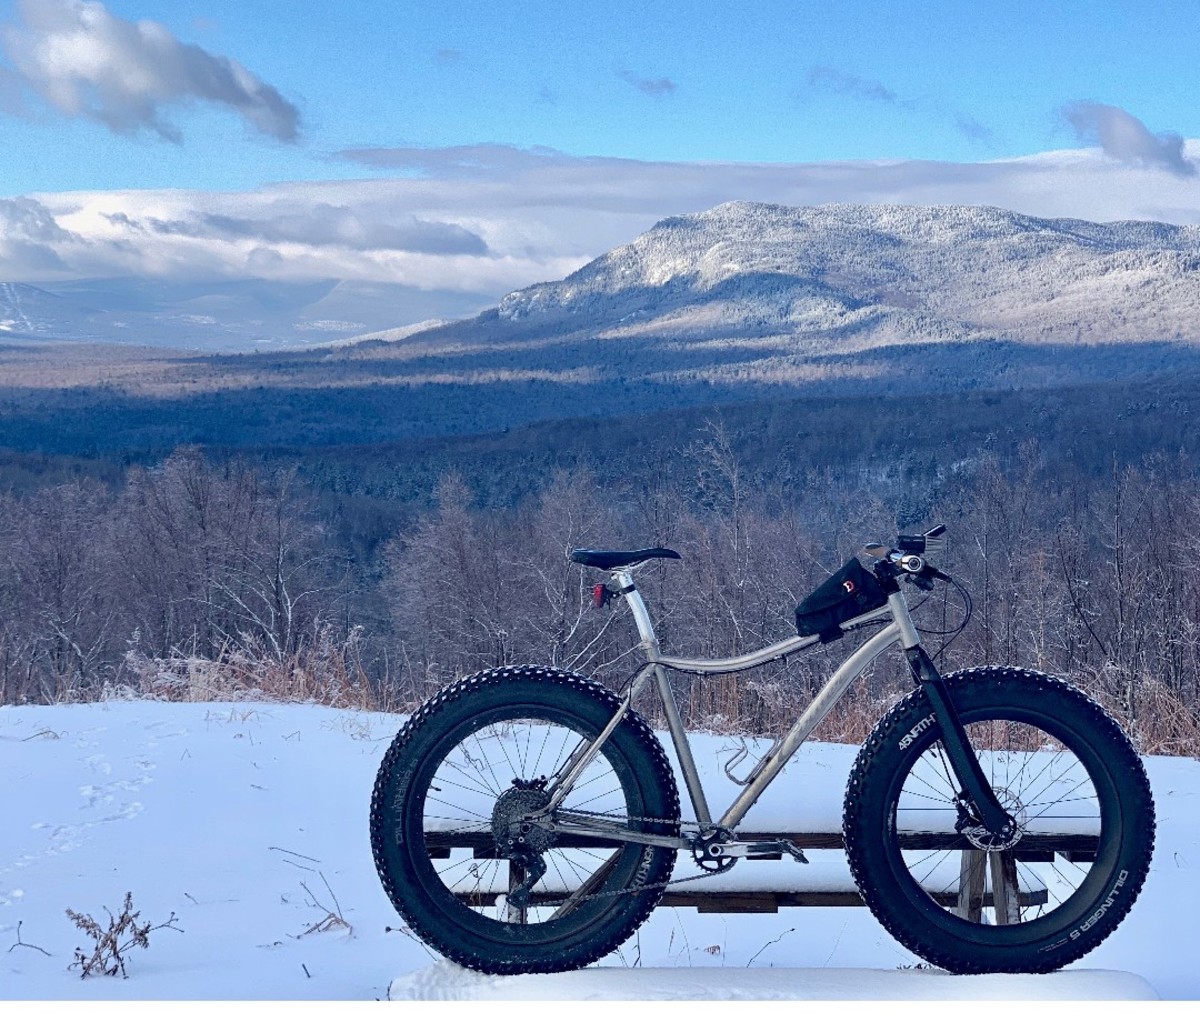 A fat bike stands in the snow with a mountain in the background in Maine's Carrabassett Valley.